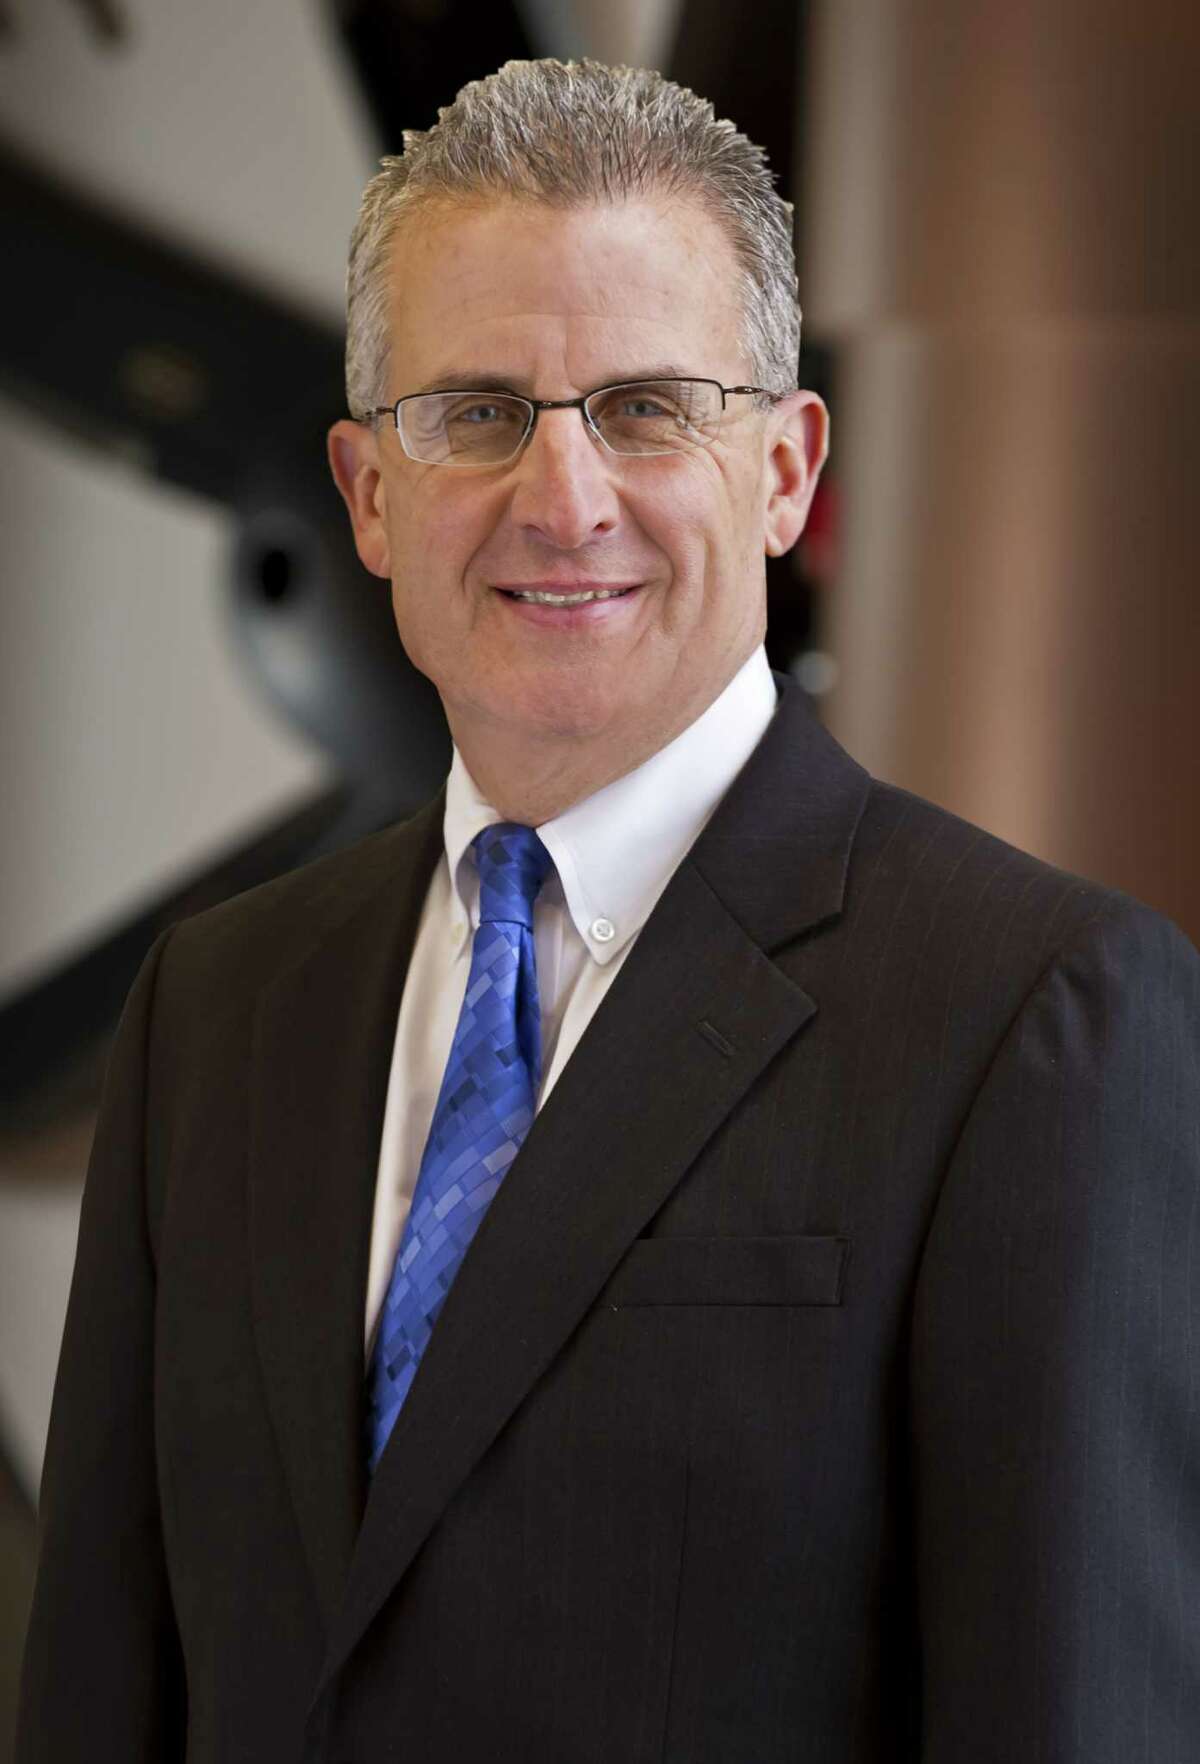 Former United Technologies executive Robert Leduc has been brought back to the company as president of Sikorsky Aircraft, replacing Mick Maurer, who will continue reporting to UTC CEO Greg Hayes in his new role as senior vice president of strategic projects.